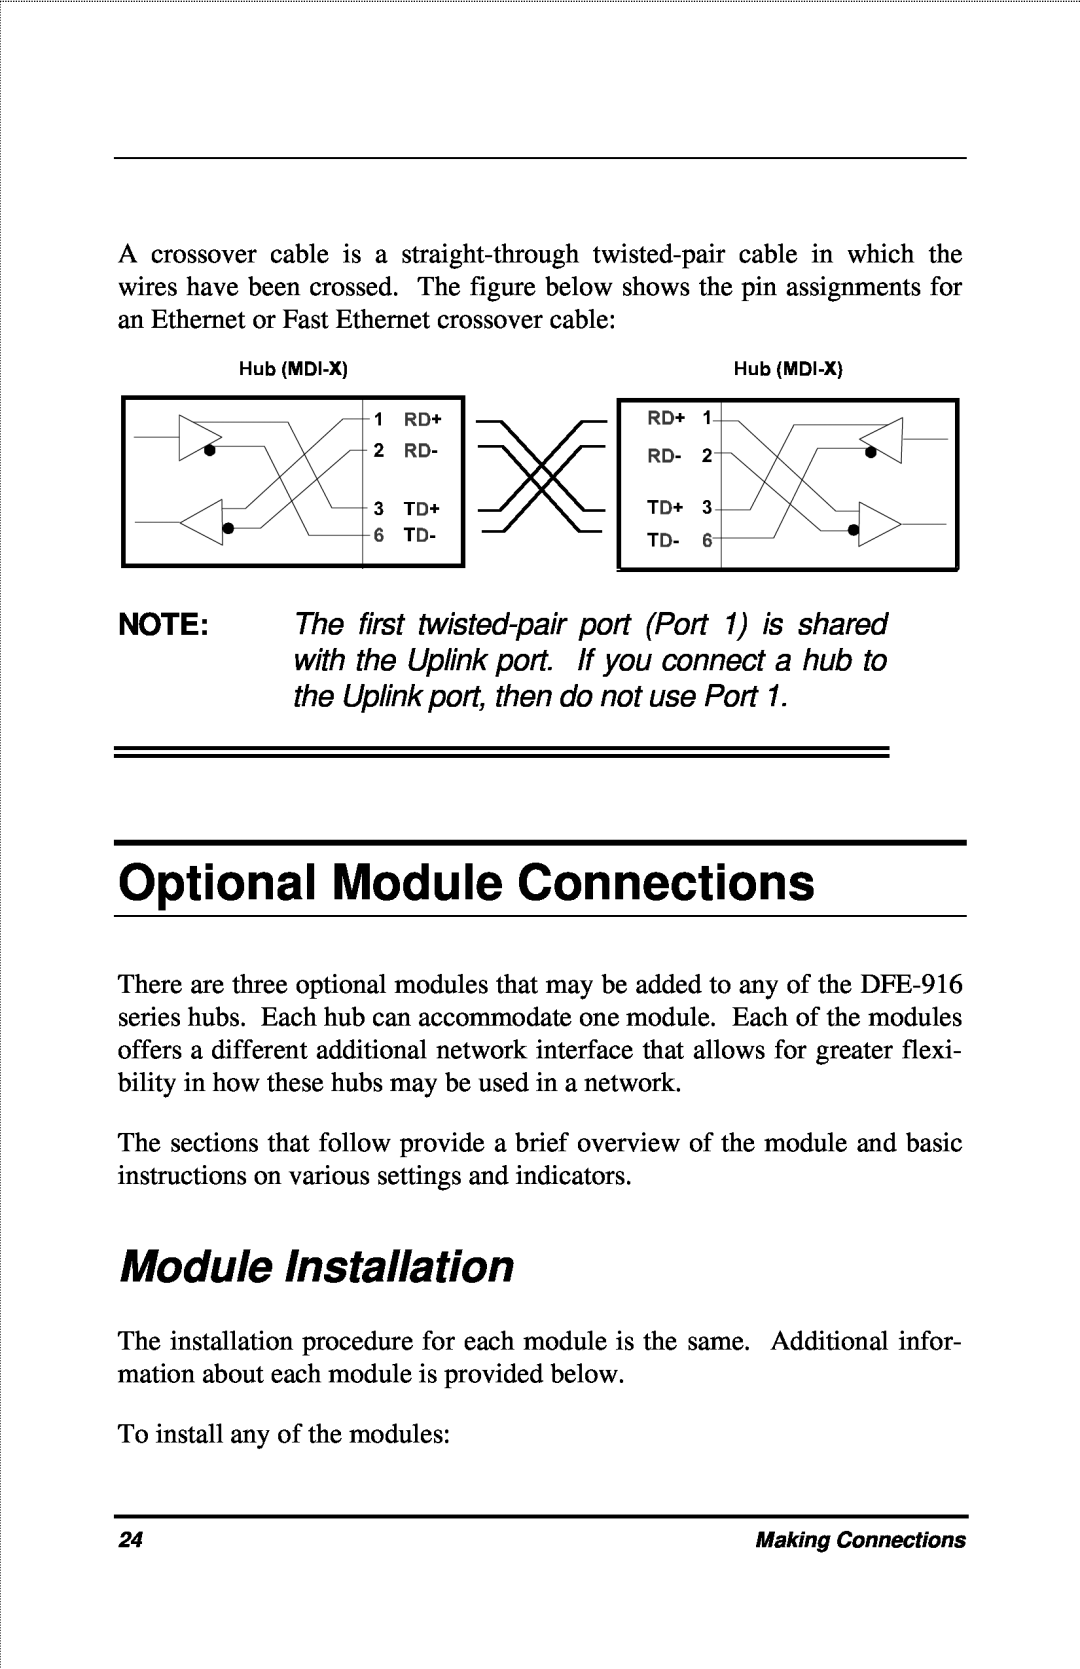 D-Link DFE-916X manual Optional Module Connections, Module Installation 